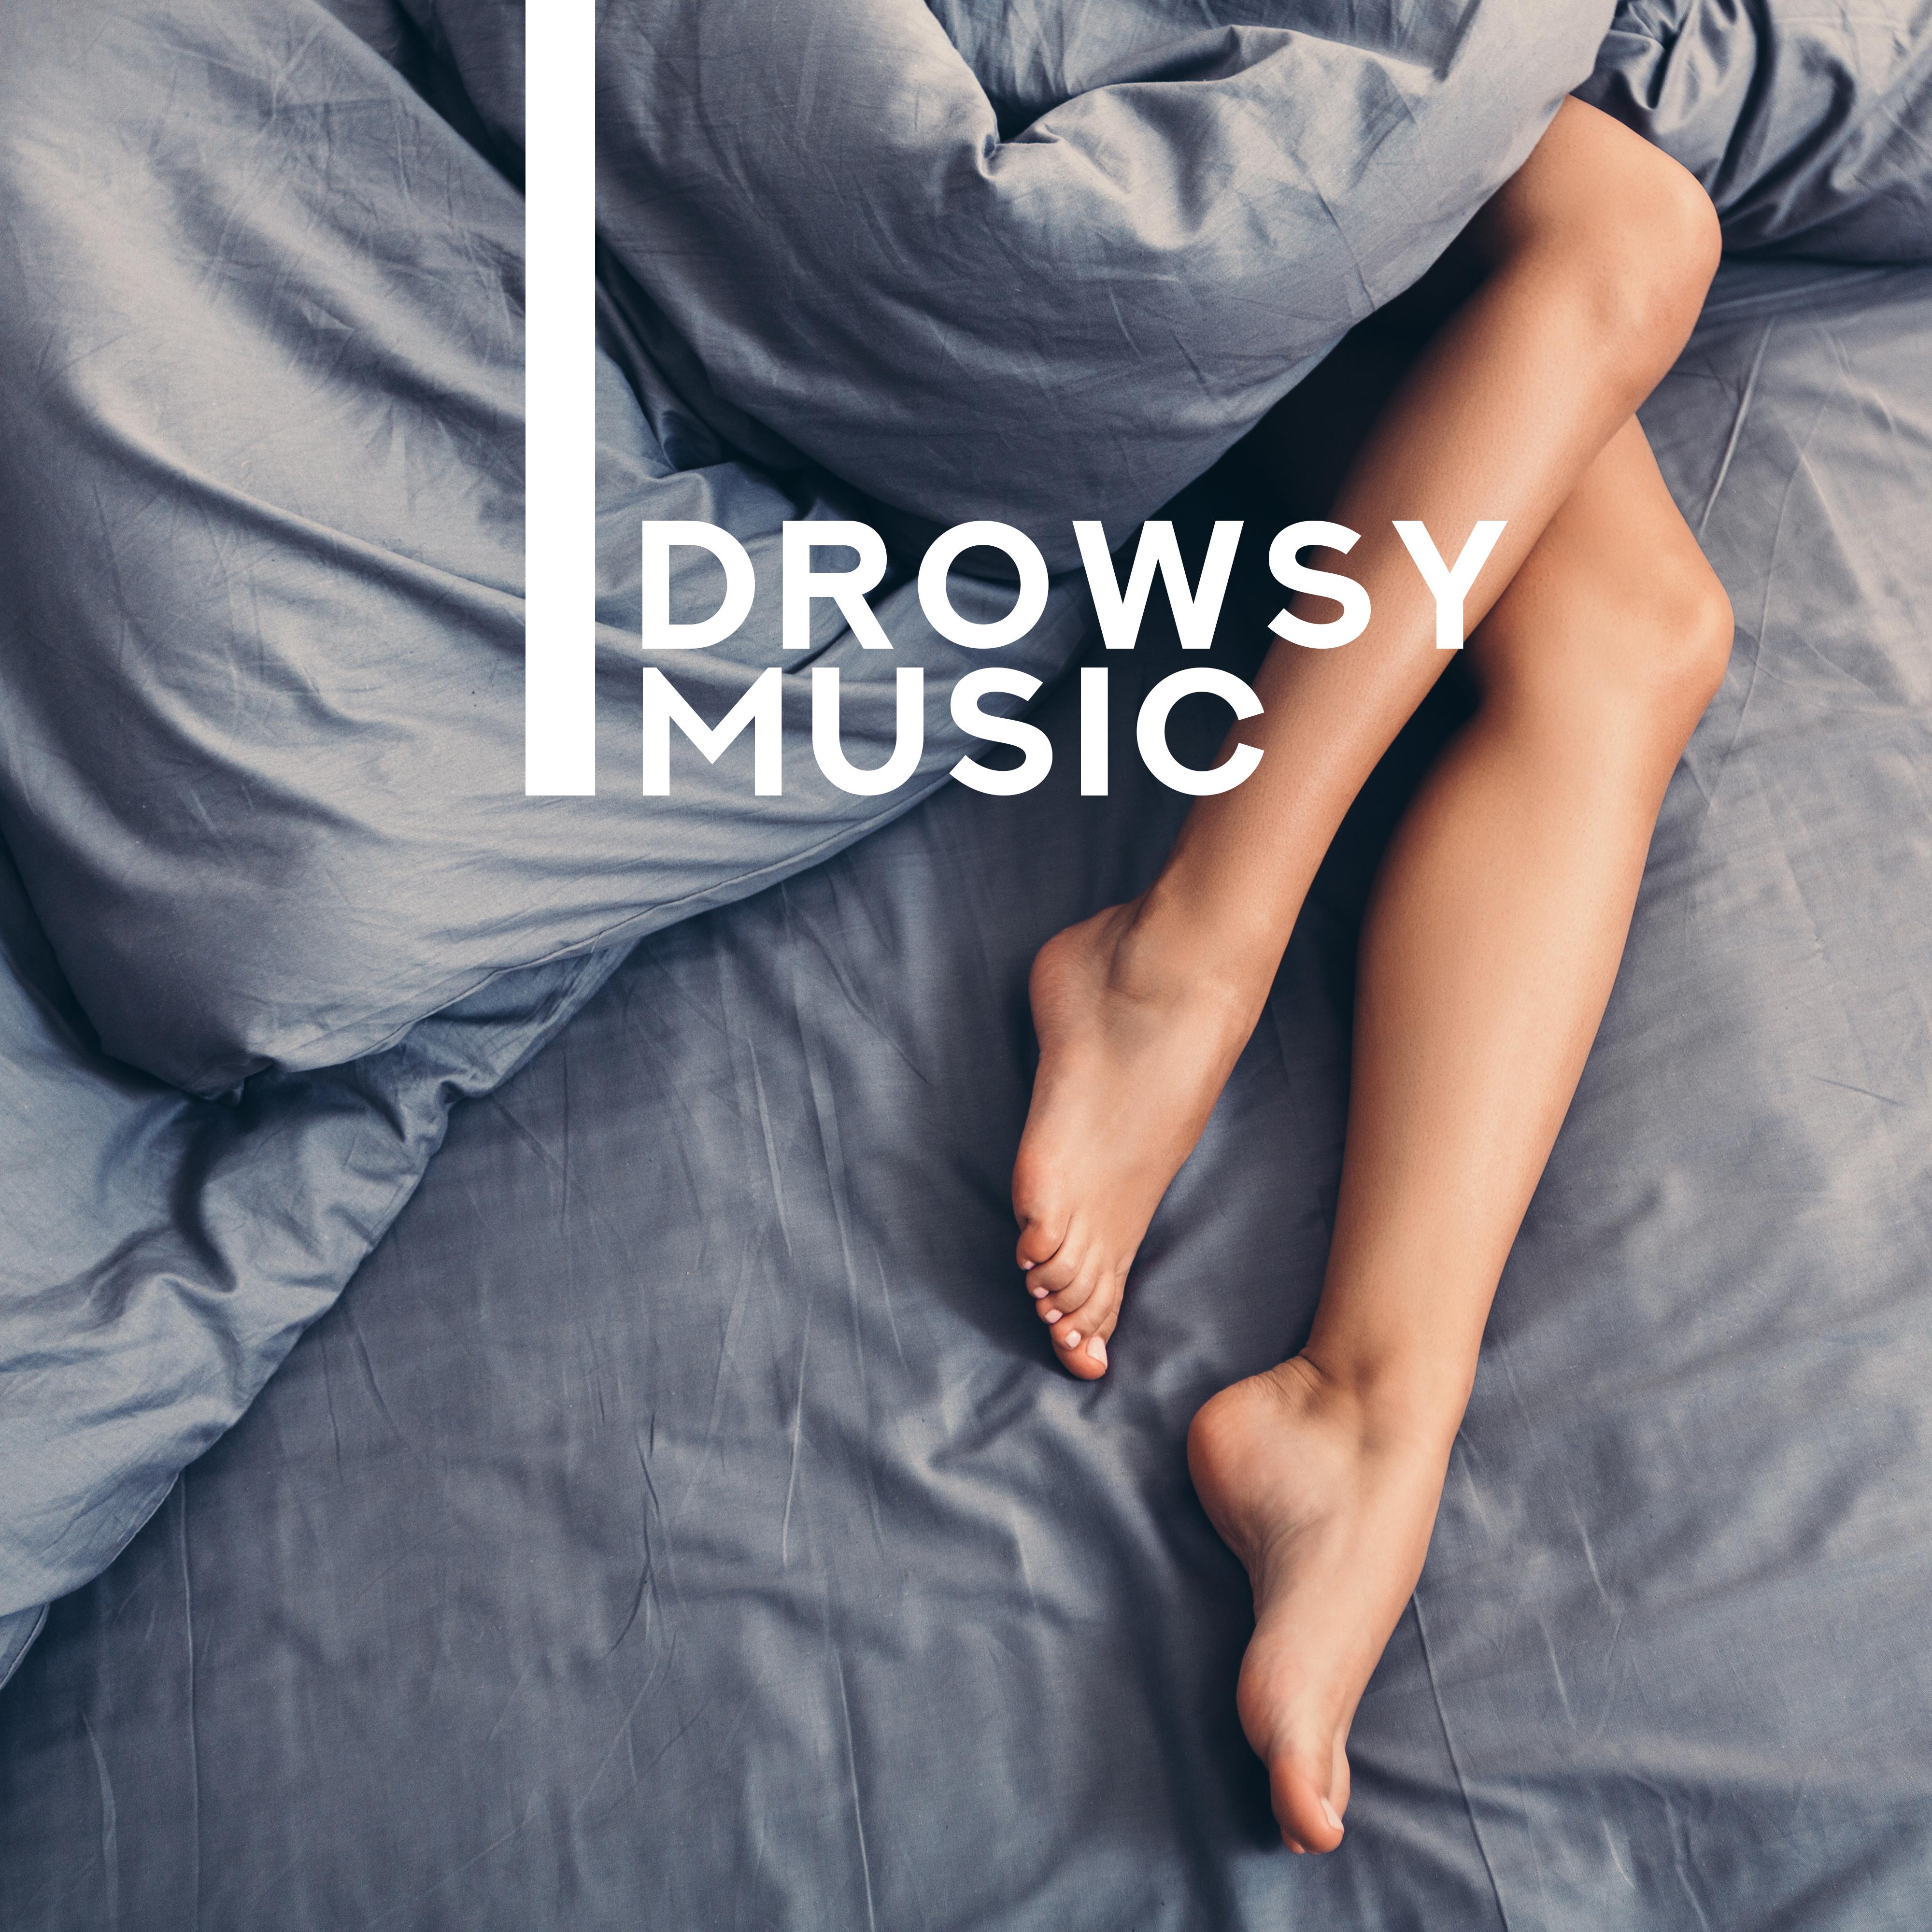 Drowsy Music - 15 Tracks to Sleep, Short Nap, Relaxation and Rest in Bed